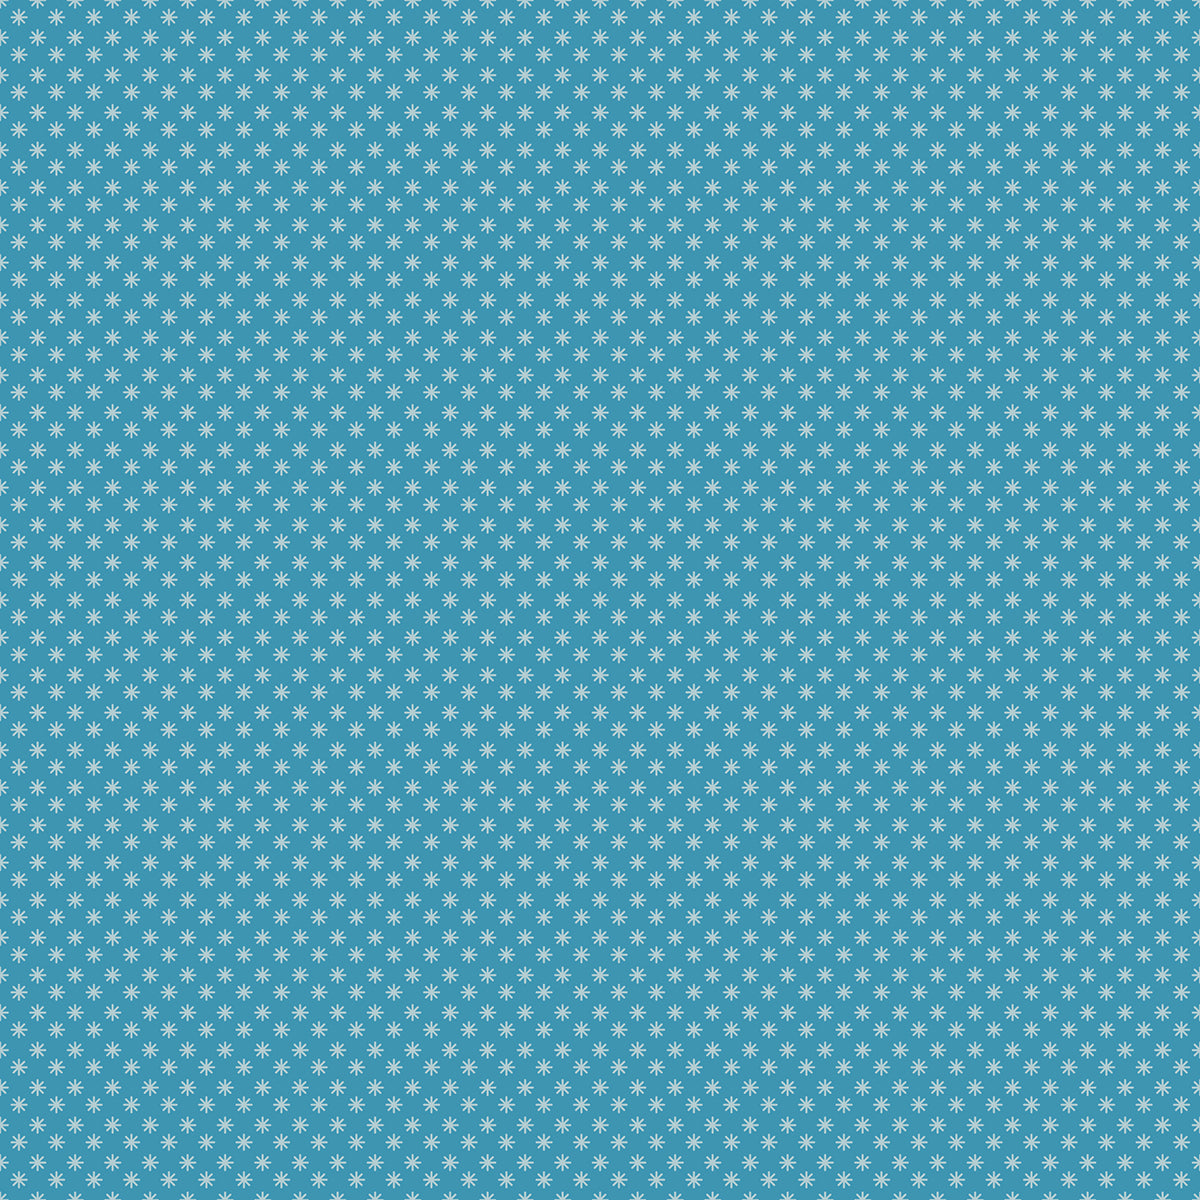 Puff- Vintage Blue from Meadow Star by Alexia Abegg for Moda Fabrics